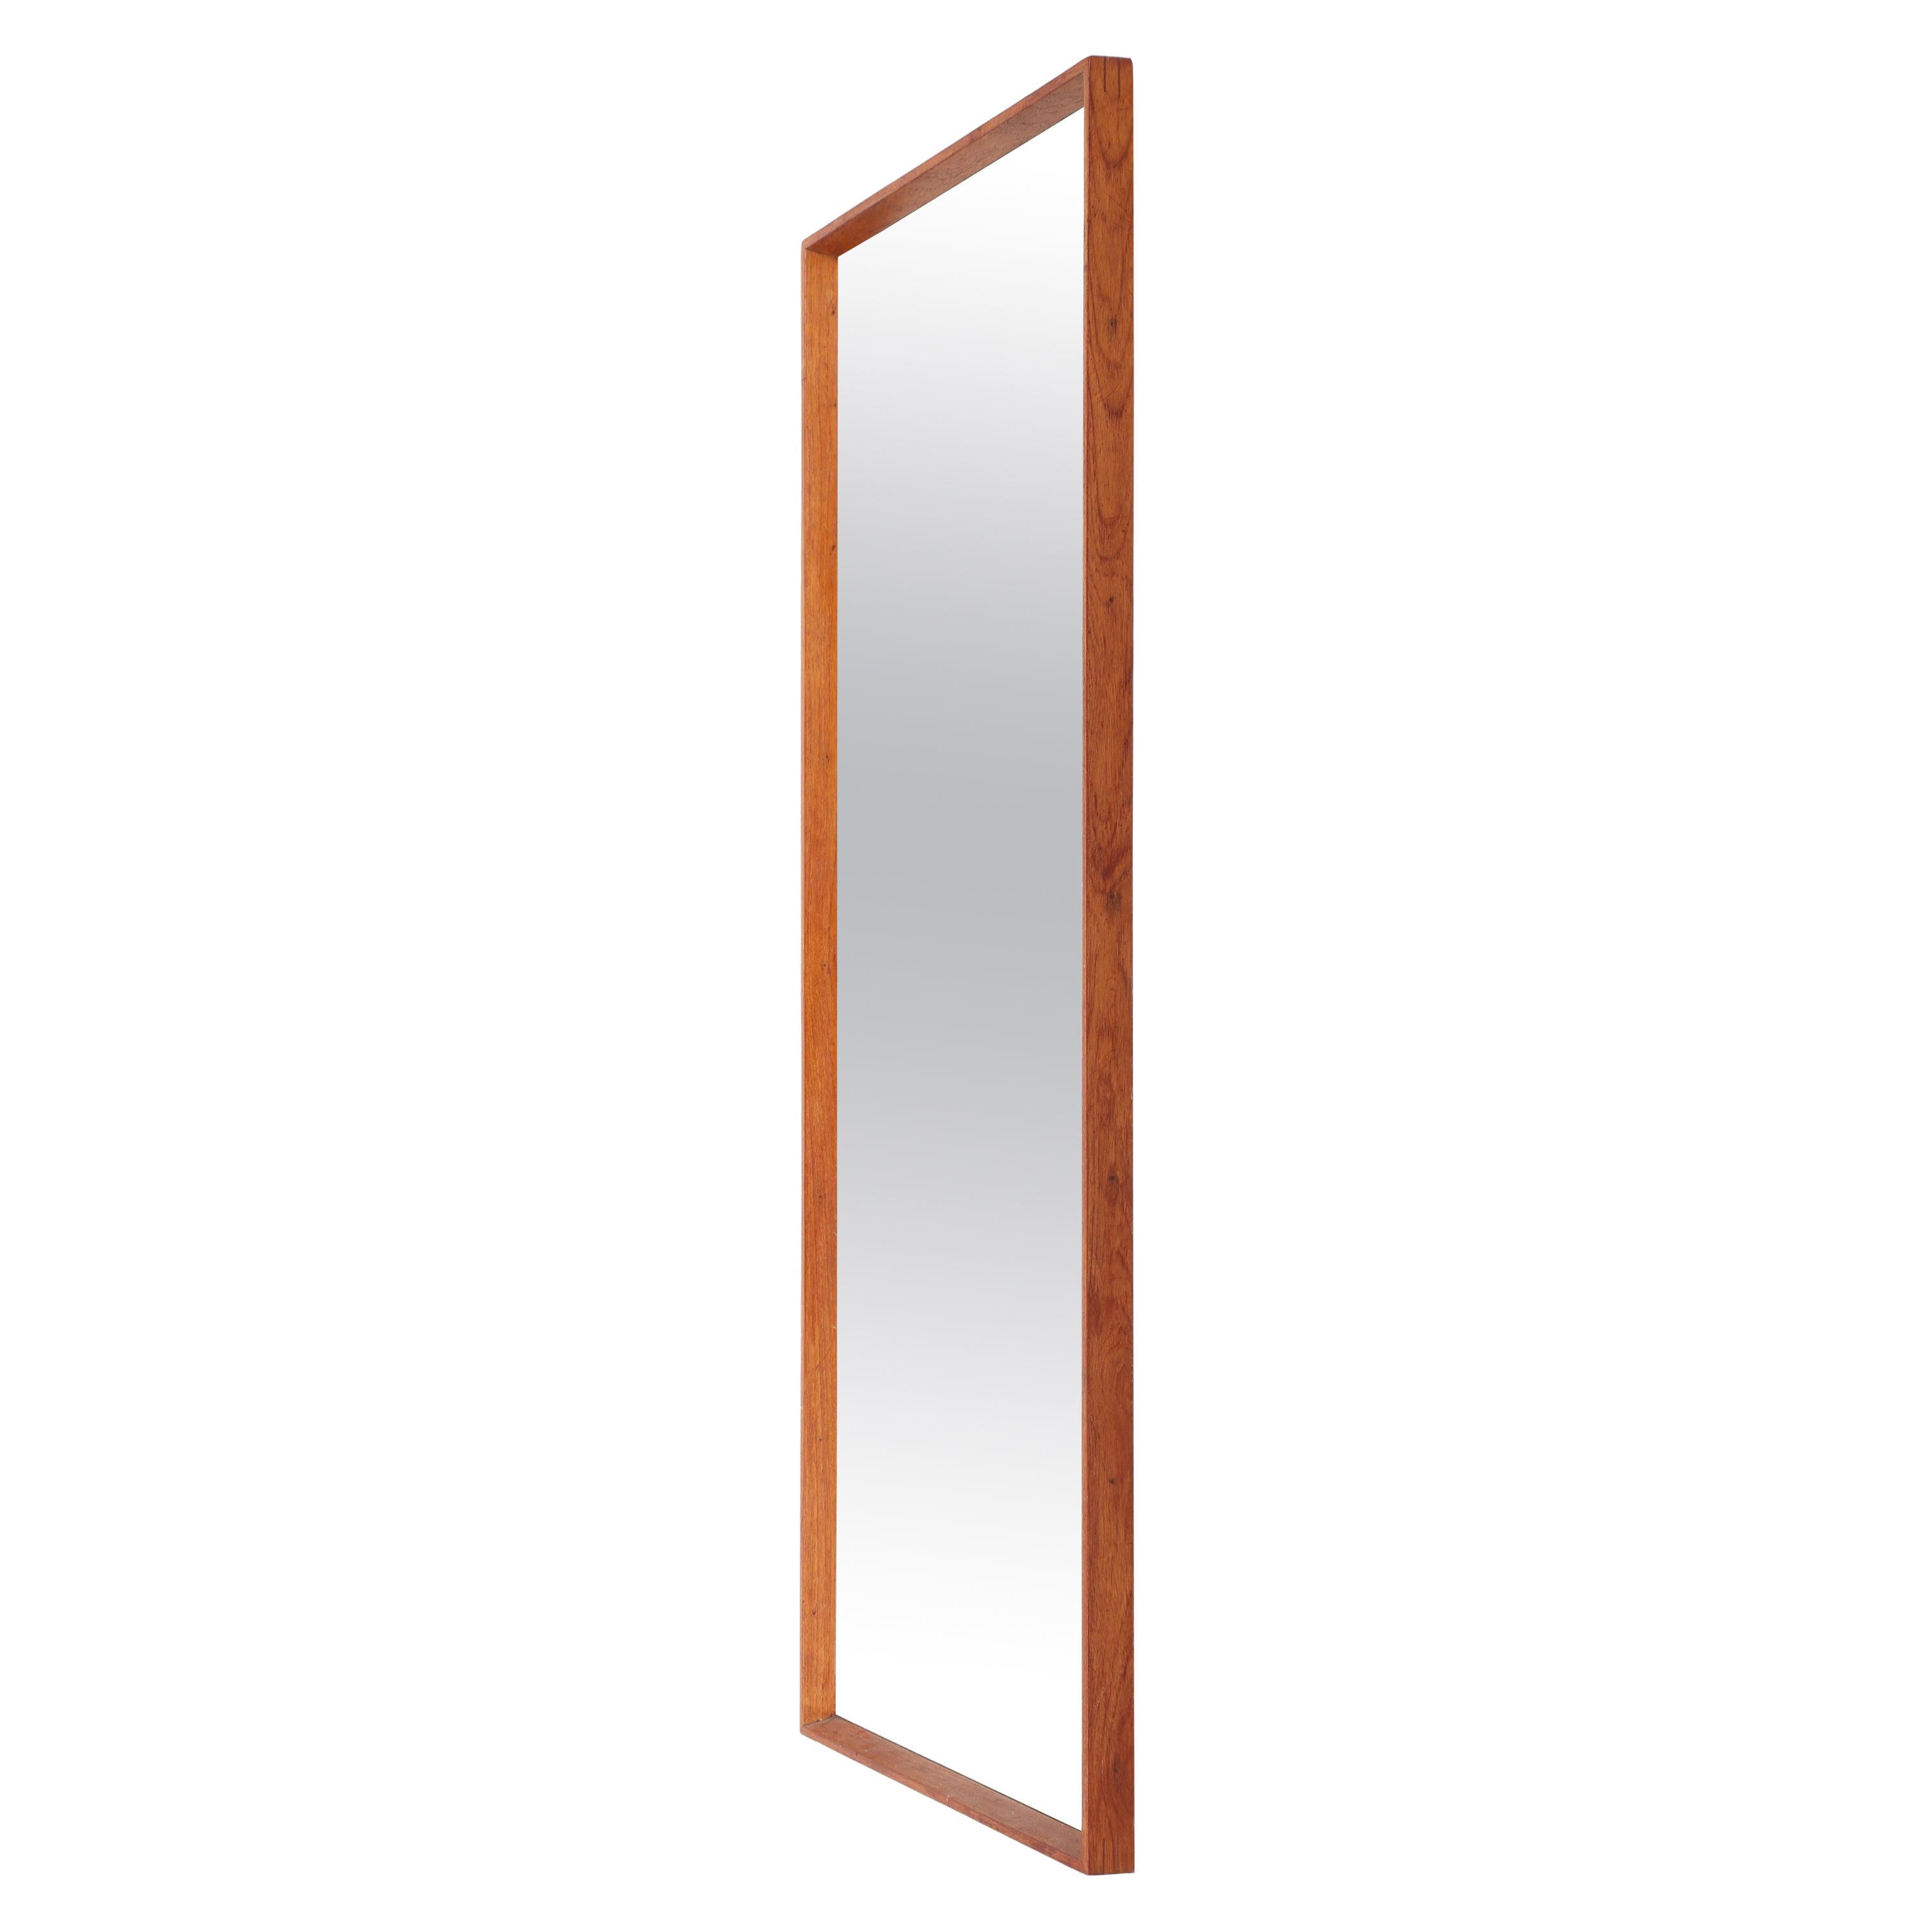 Large Midcentury Wall Mirror in Teak, Made in Sweden, 1950s For Sale